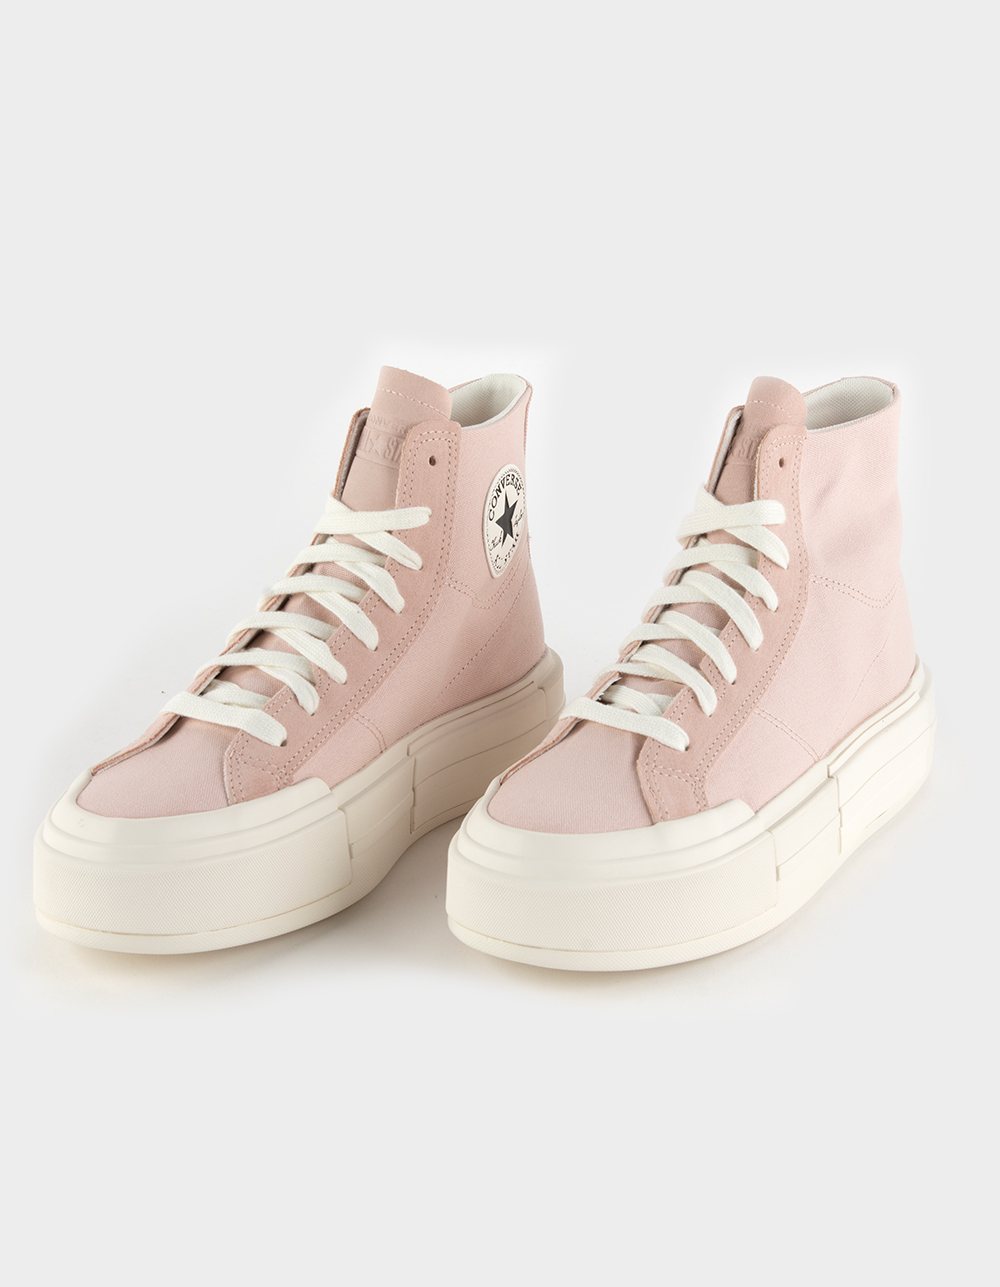 CONVERSE Chuck Taylor All Star Cruise Womens High Top Shoes - PINK | Tillys